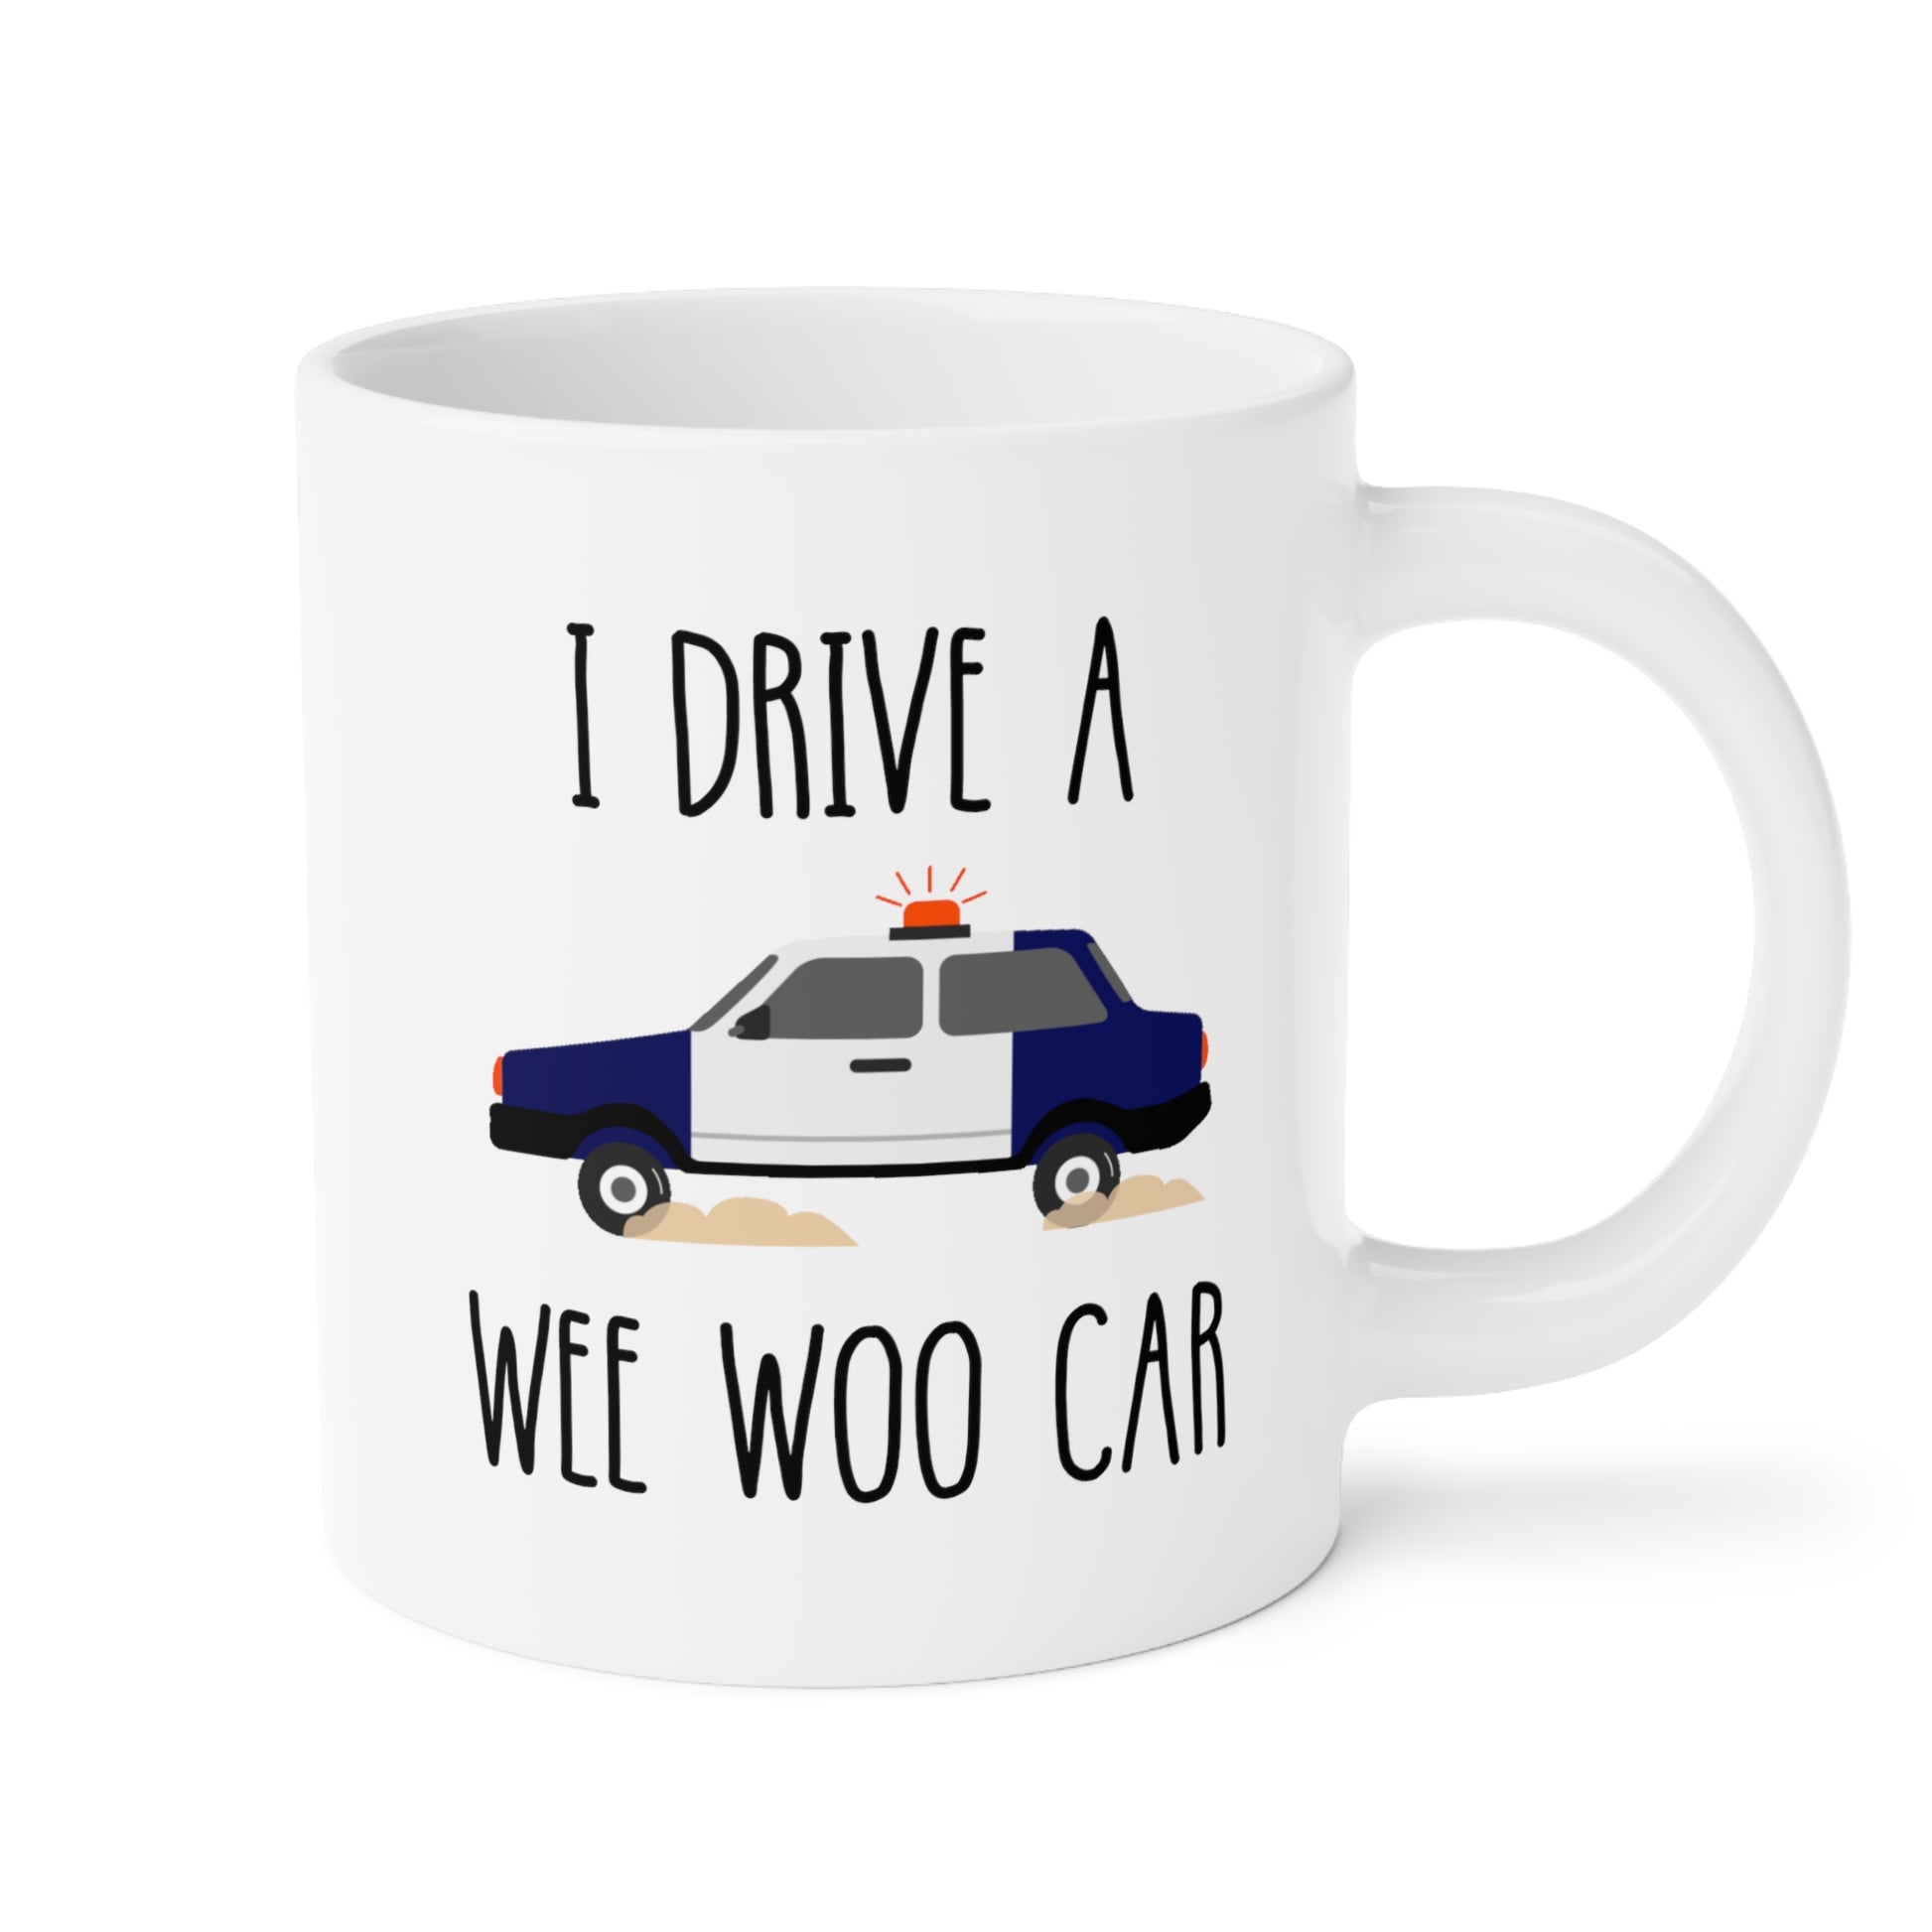 I Drive A Wee Woo Car 20oz white funny large coffee mug gift for police cop officer graduation birthday waveywares wavey wares wavywares wavy wares